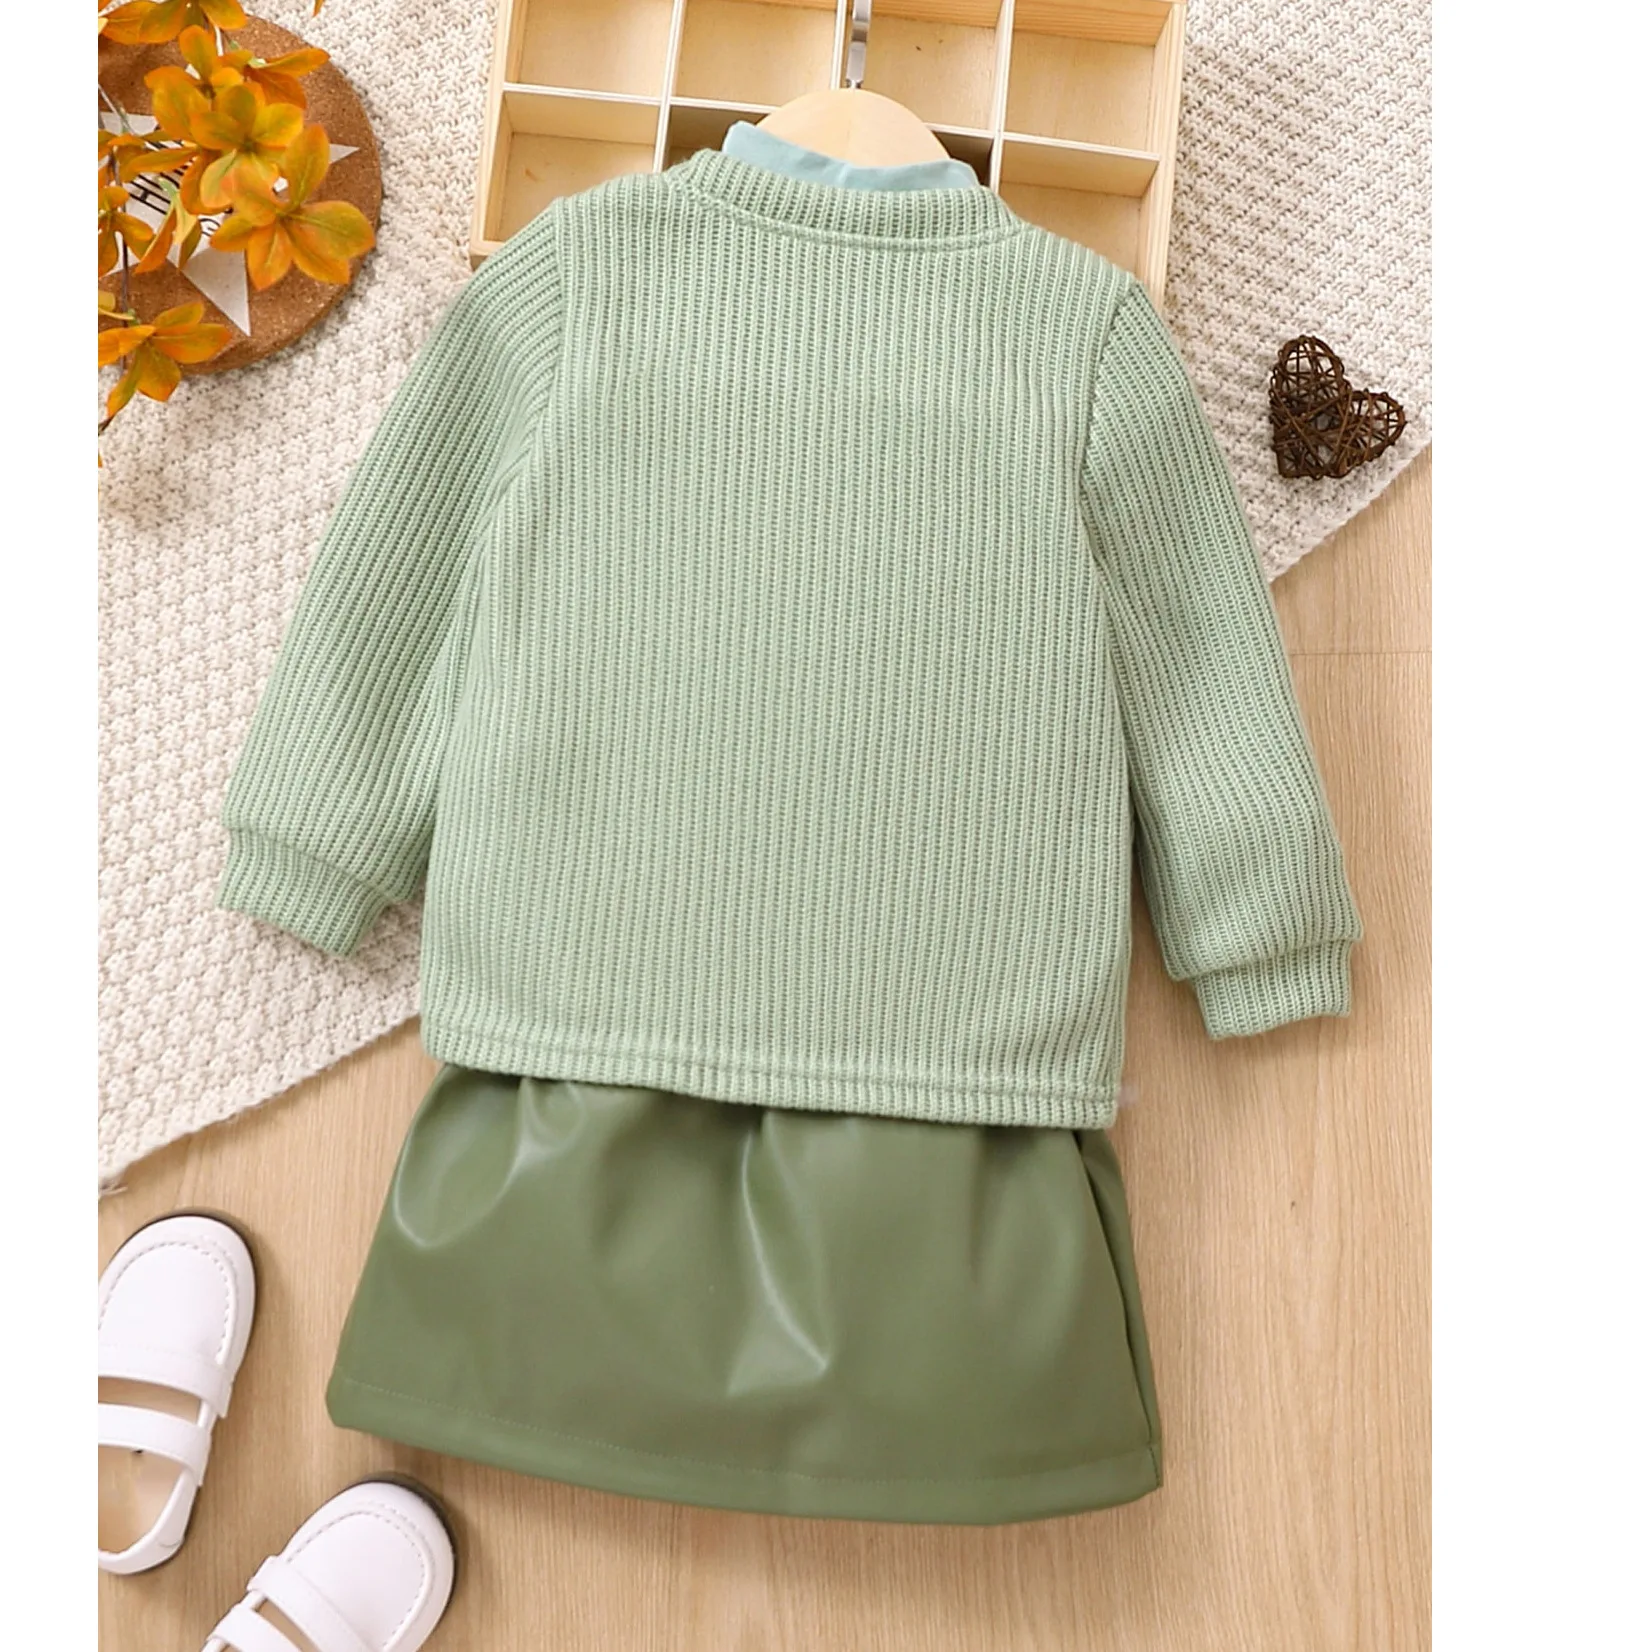 New arrival toddler girls clothes fashion outfits leather skirt+shirts+cardigan sweater 3pcs boutique kids clothing suits